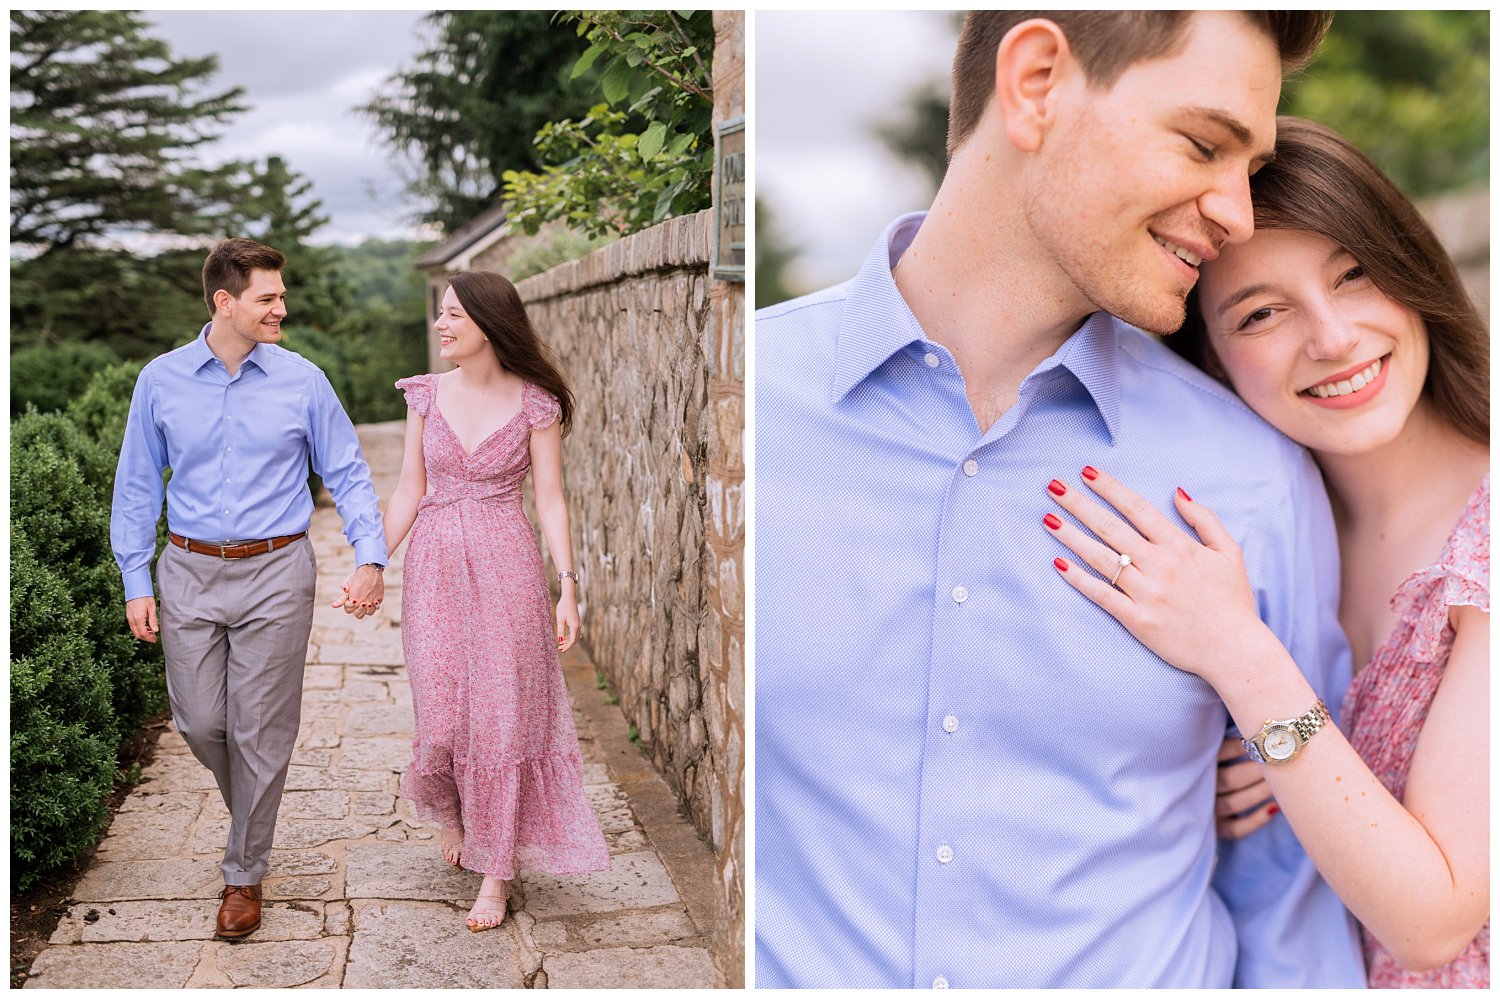 Engagement shoot at Maymont Park, one of the most popular waterfront engagement session locations in Richmond.